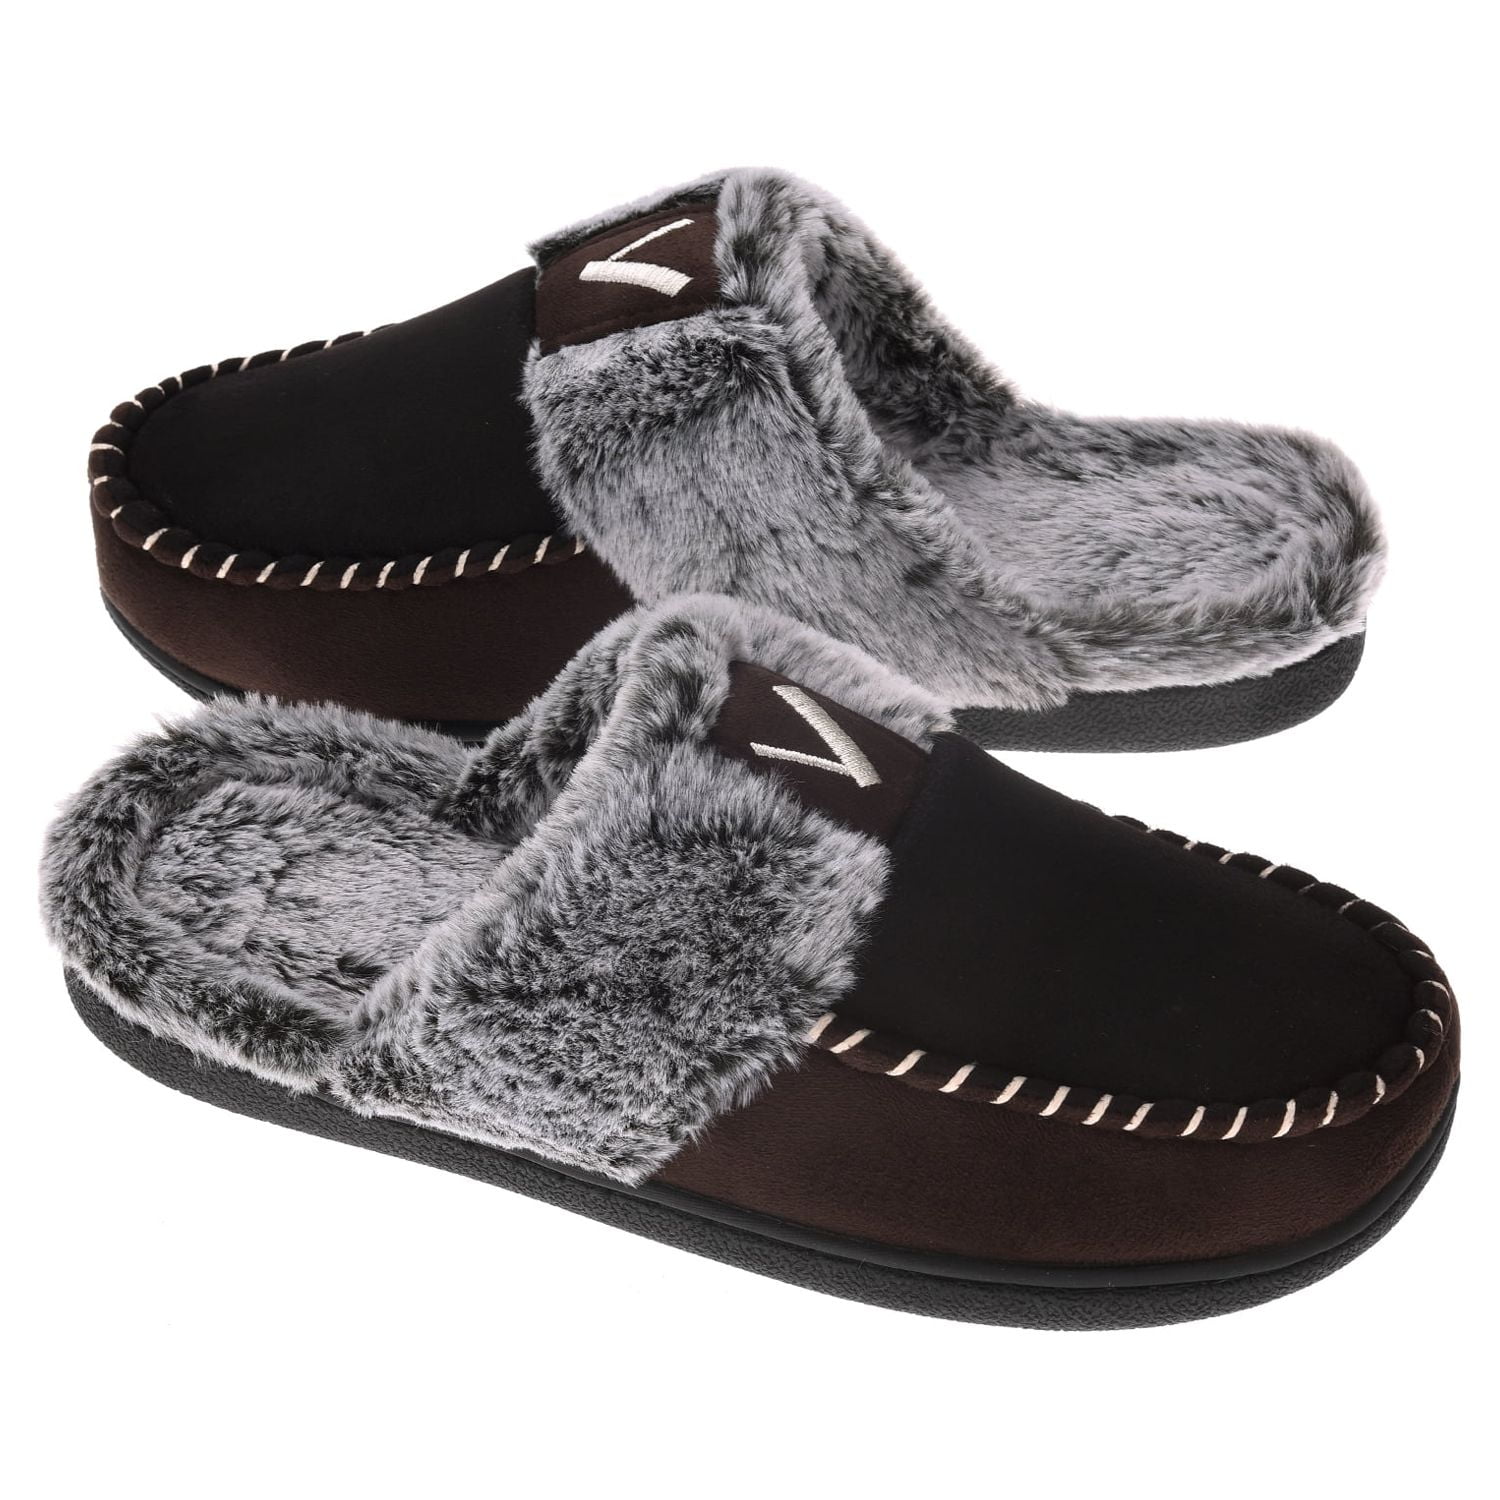 VONMAY Women s Comfy Fuzzy House Slipper Scuff Memory Foam Slip on Warm Moccasin Style Indoor Outdoor 4caf58a4 a9b1 47dd 9362 57a4769babc1.4c828f9719c759dd82b9f799837e7732